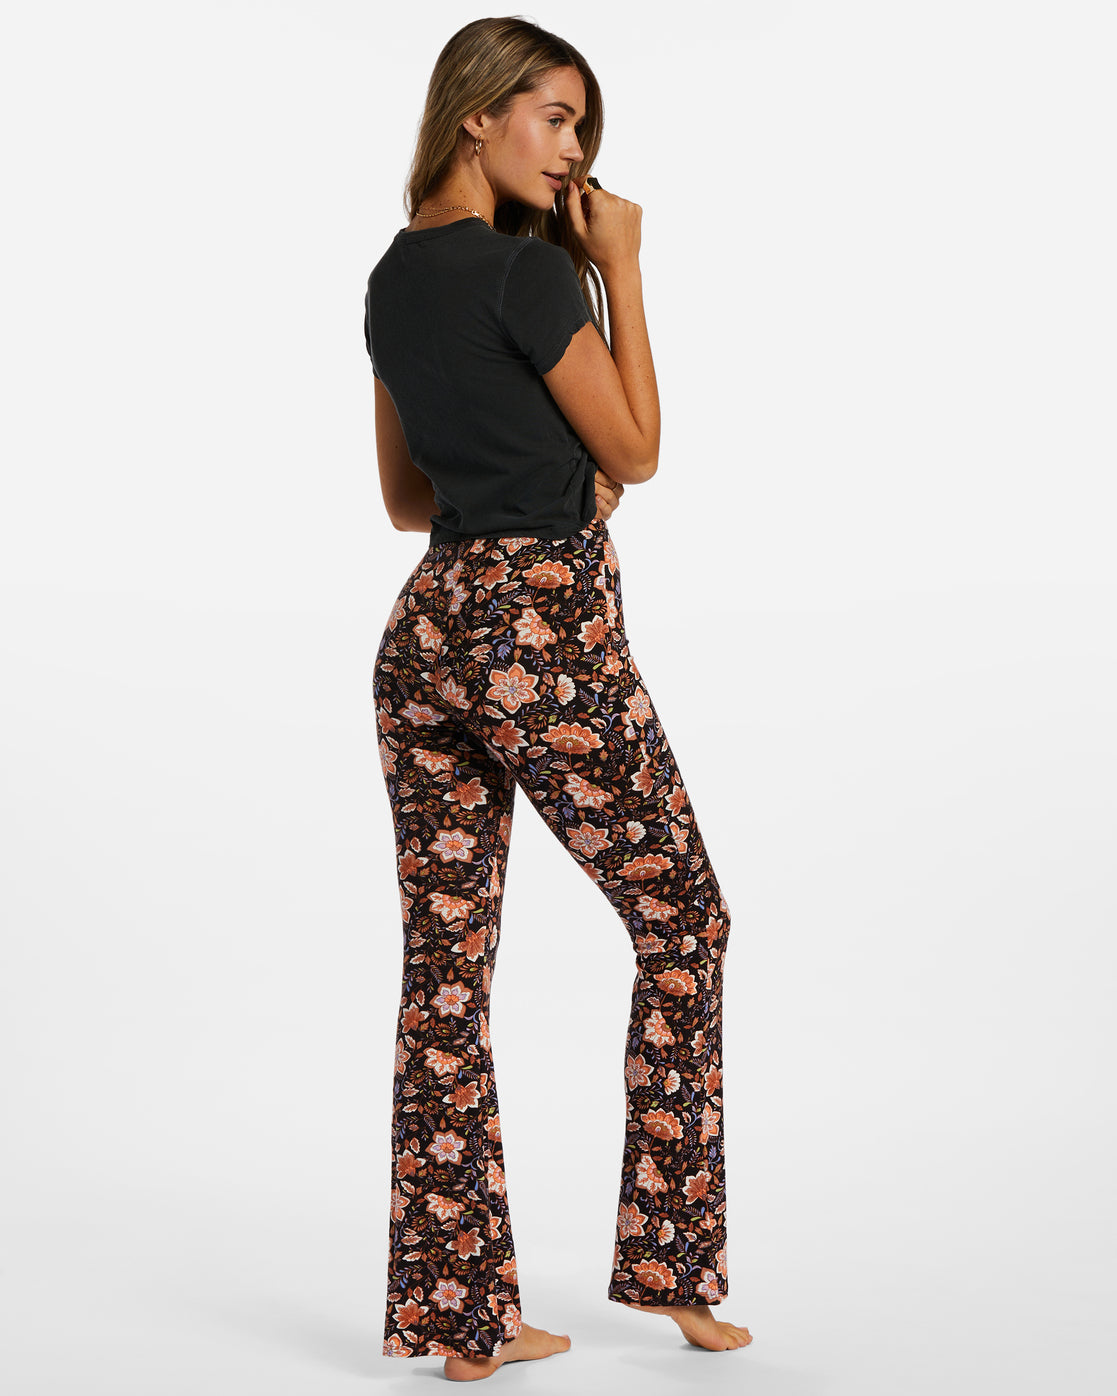 Jamir Pants - Linen Look High Waisted Fit and Flare Pants in Black | Showpo  USA